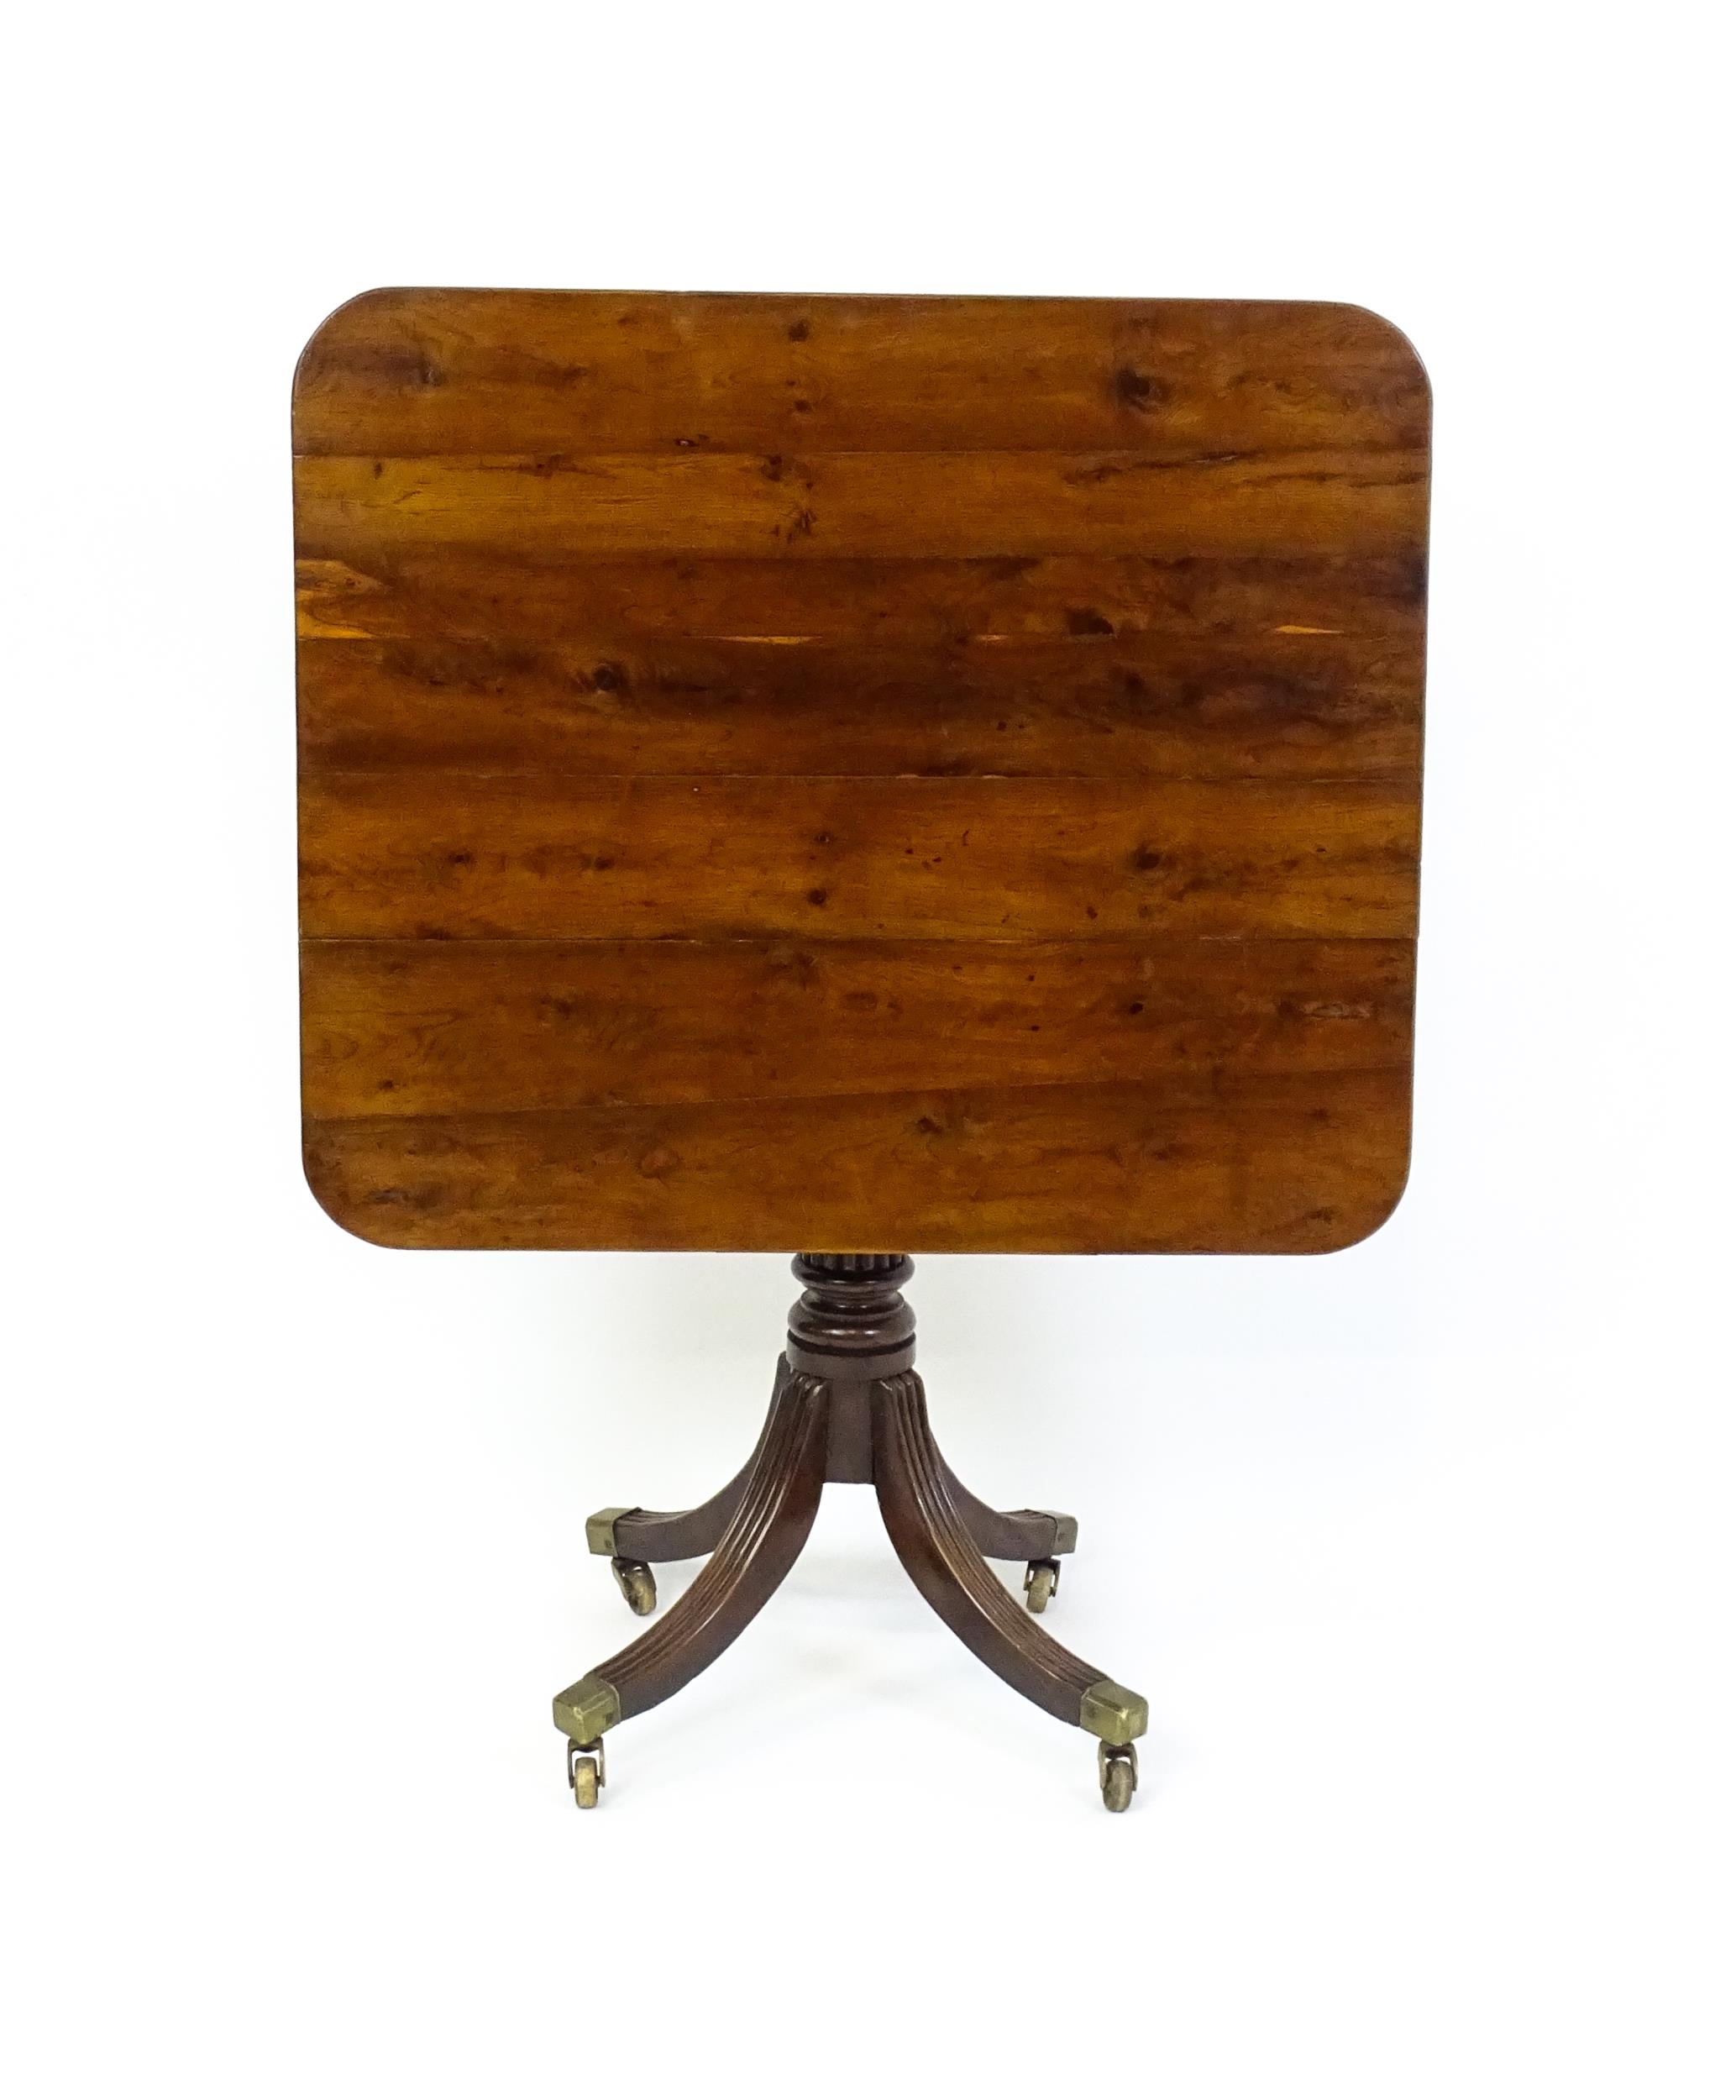 A 19thC tilt top occasional table with yew wood planked top above a reeded mahogany pedestal and - Image 3 of 13